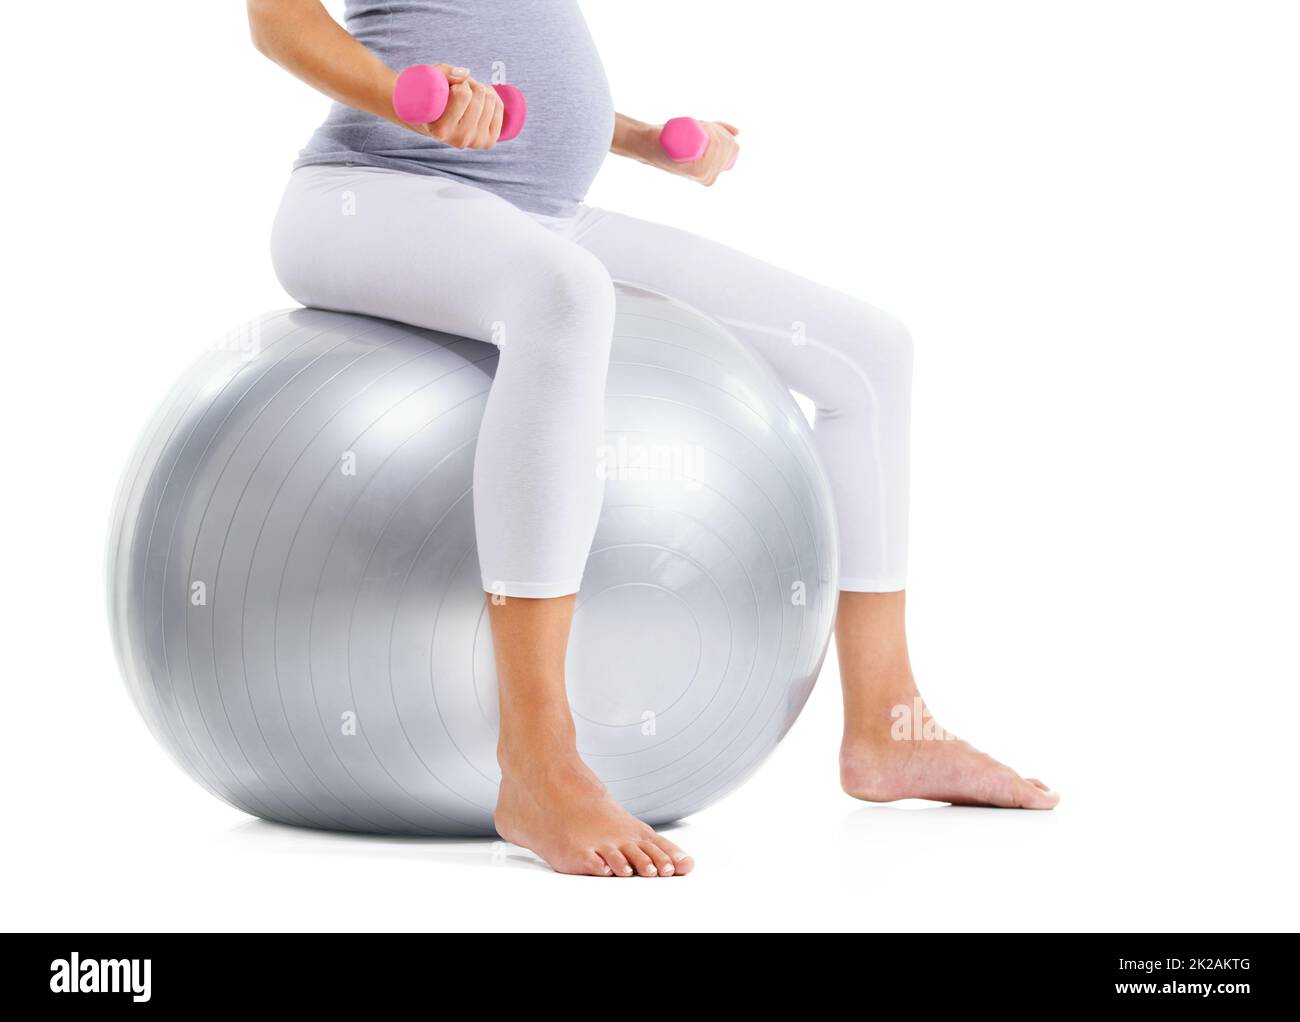 Maintaining her fitness. Cropped image of a woman working out with an exercise ball and light weights. Stock Photo